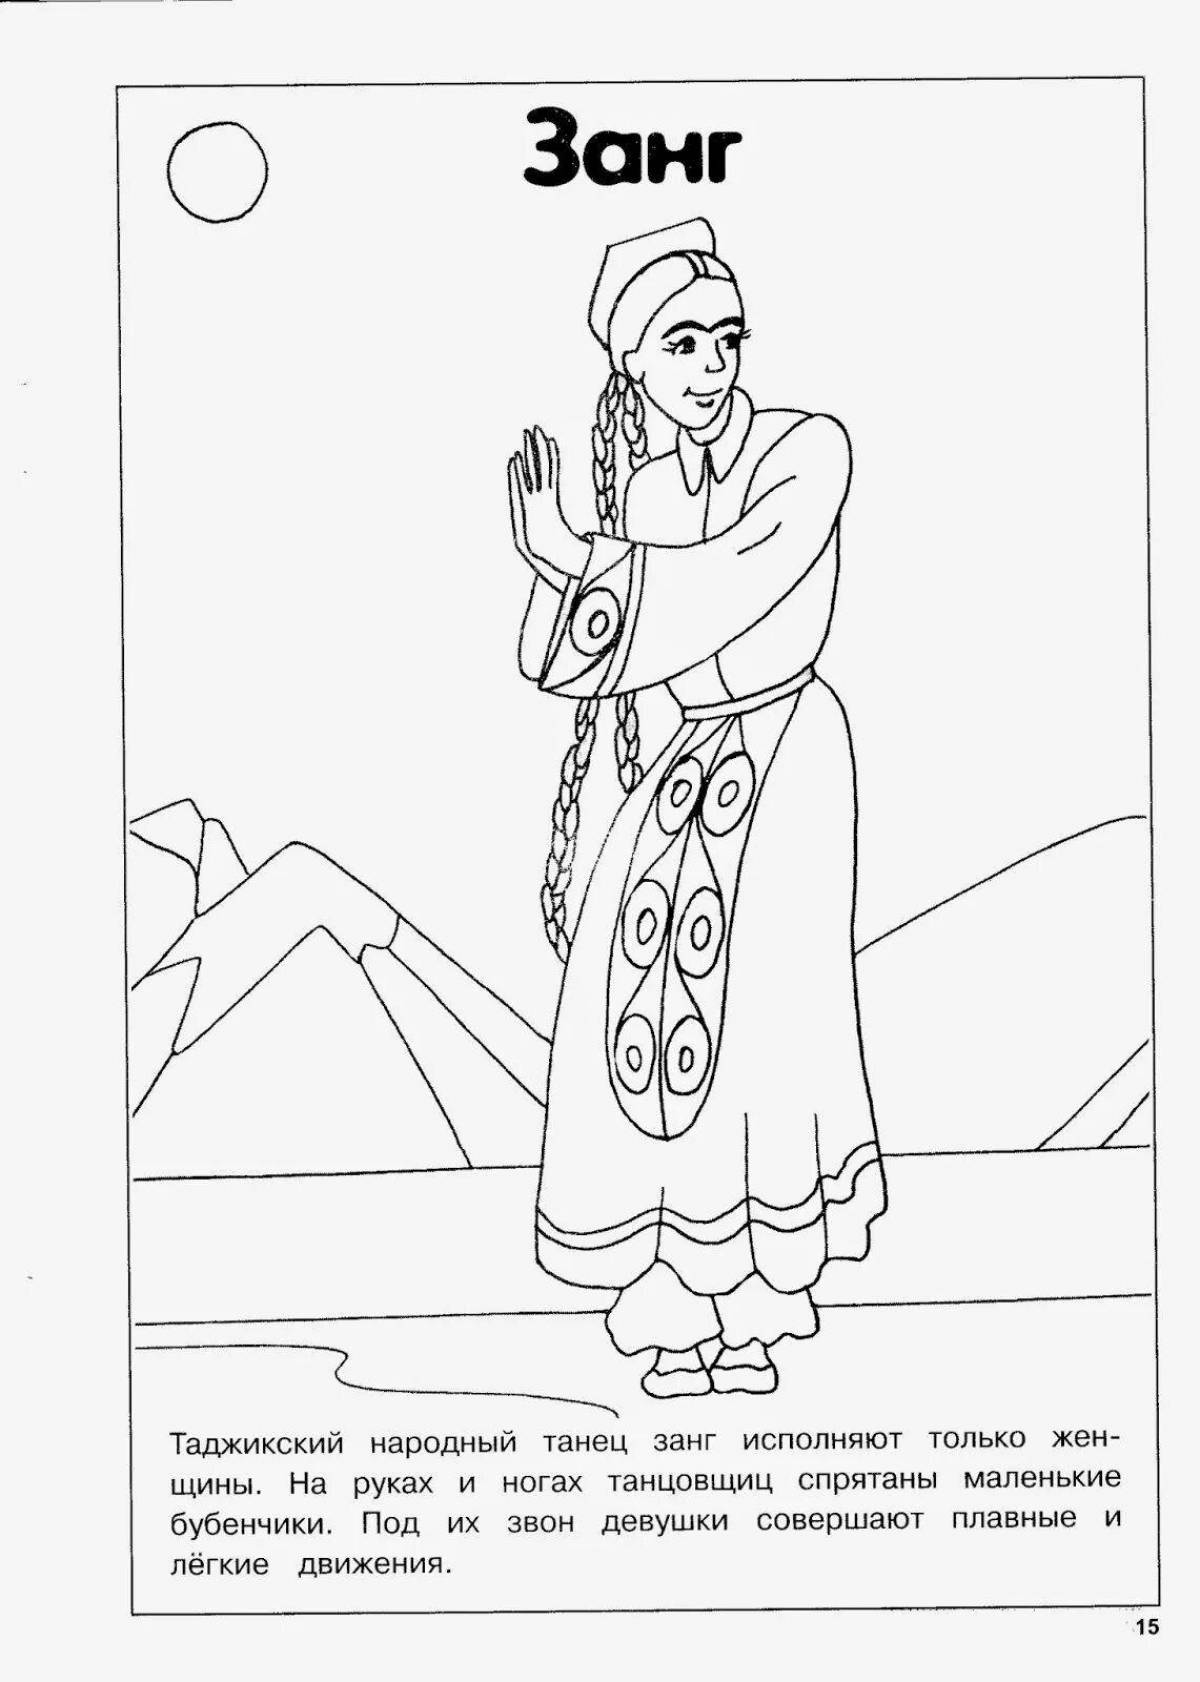 Colorful folk dancing coloring pages